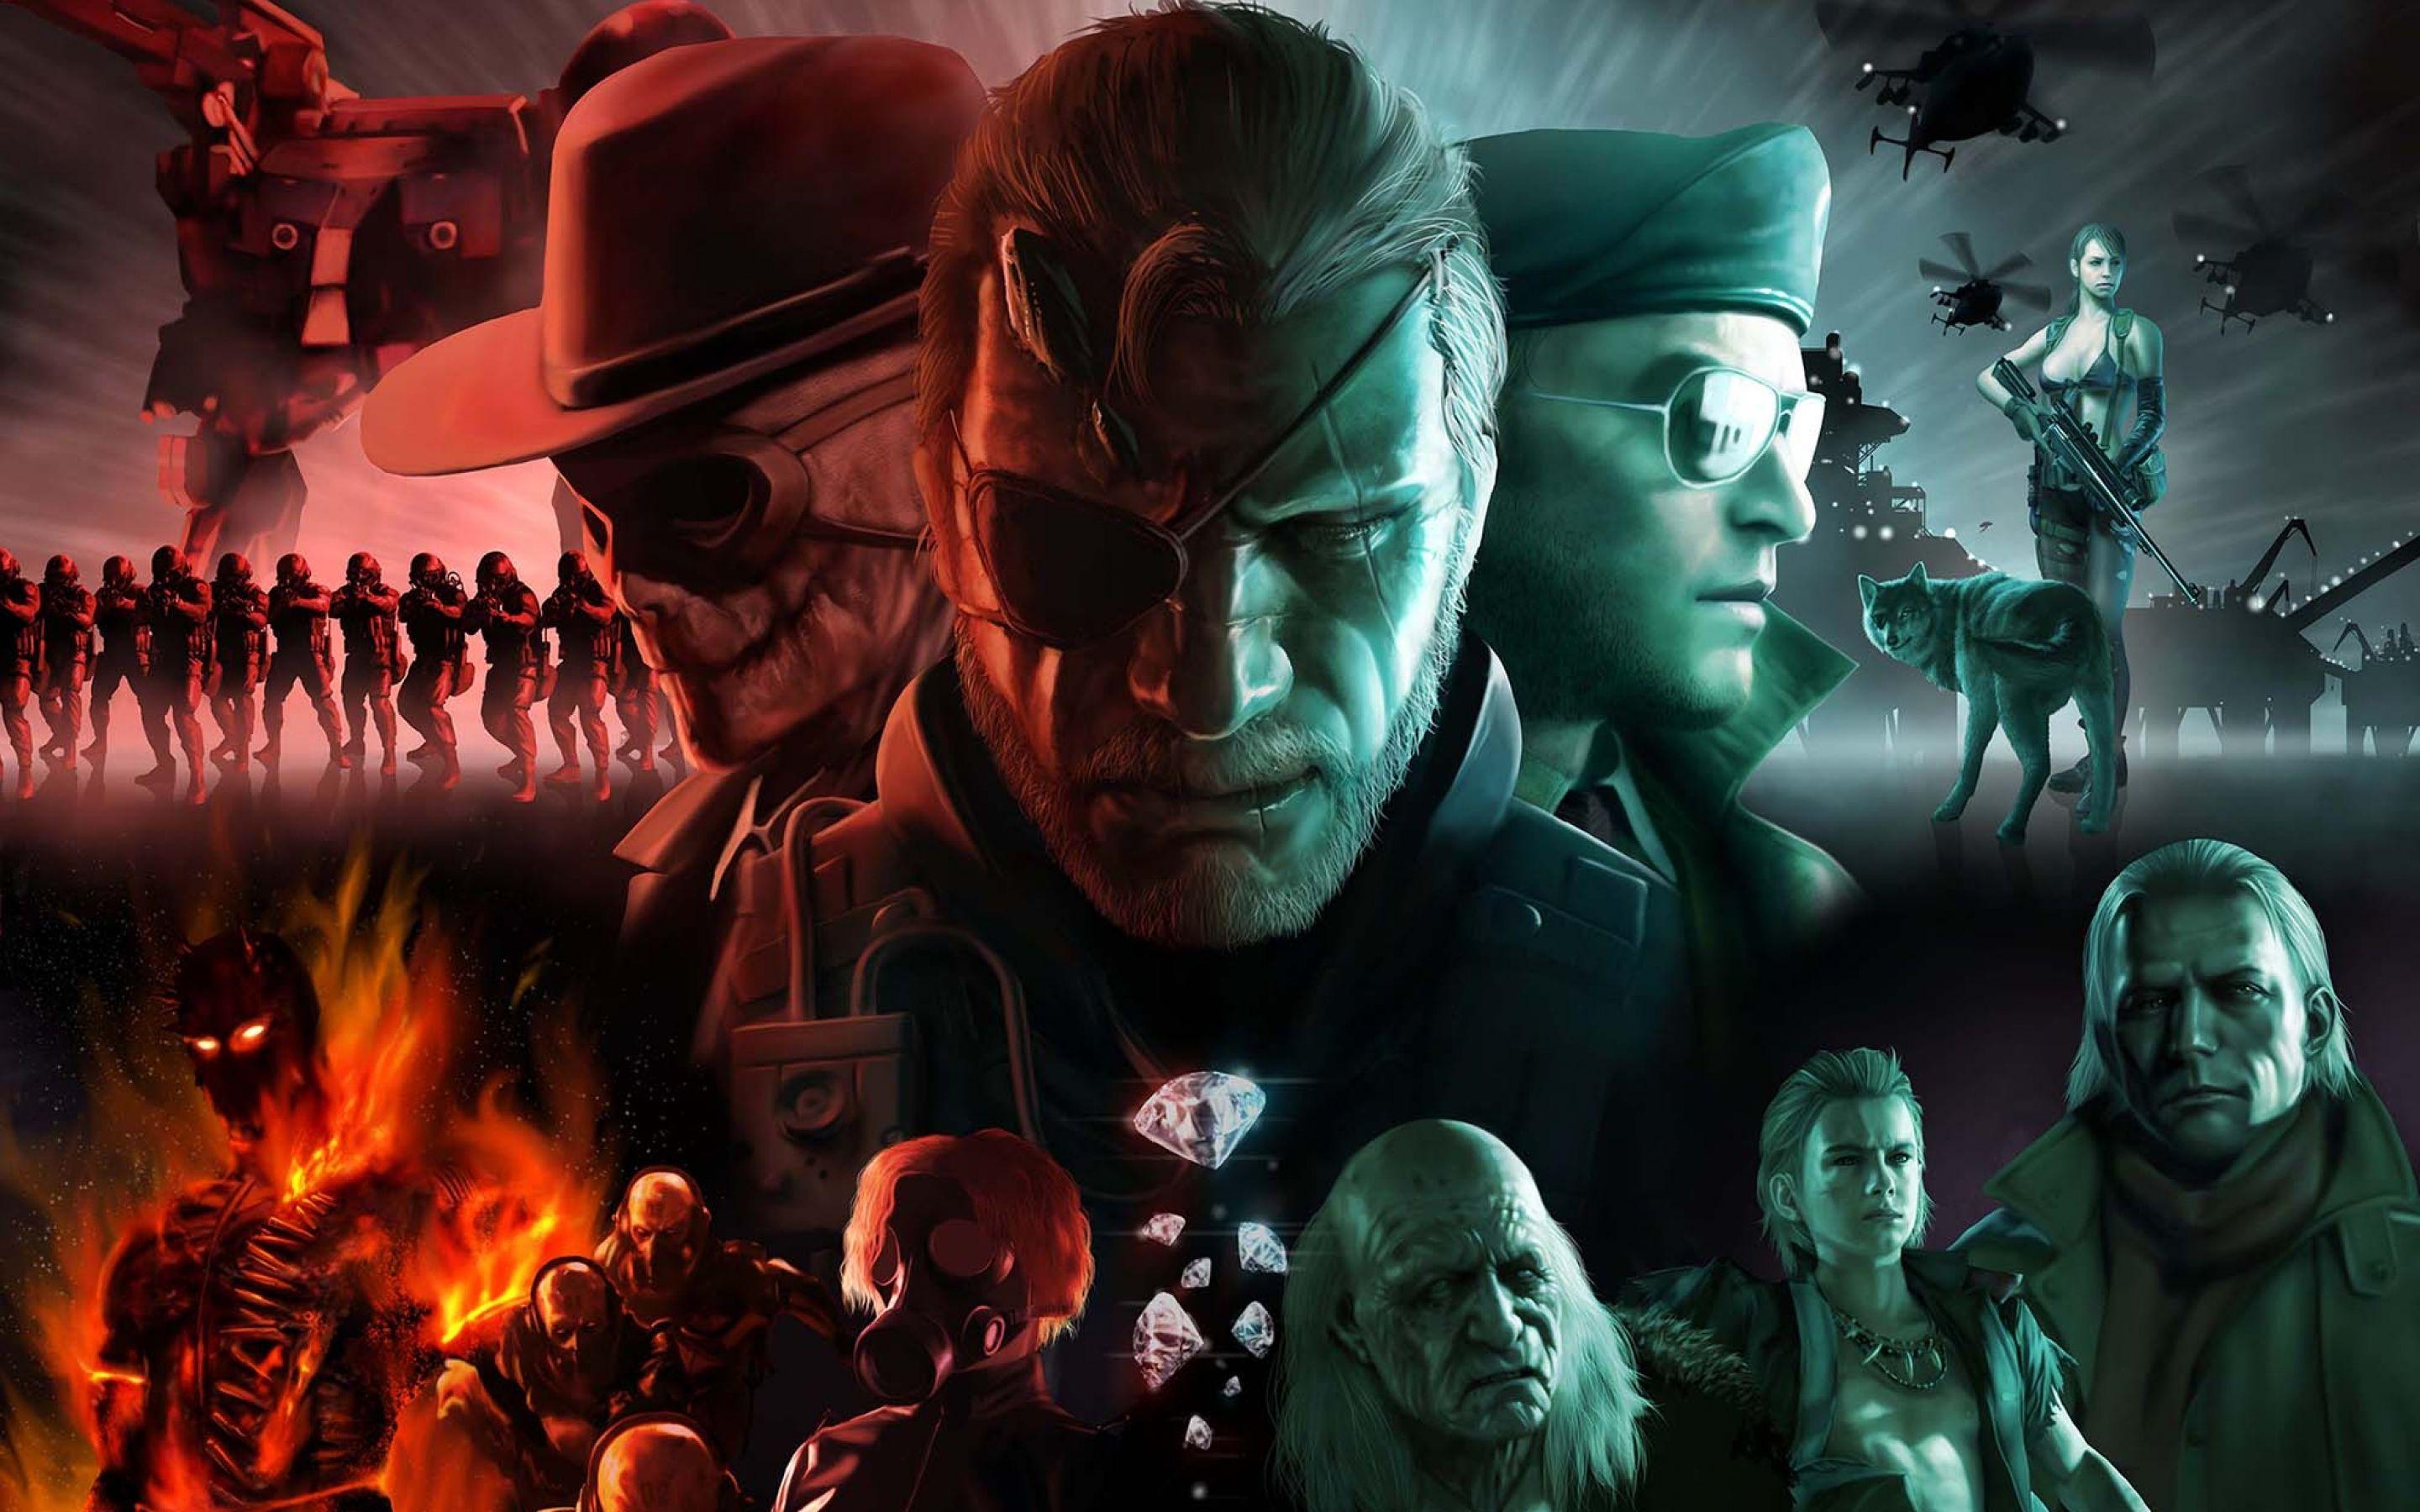 Metal Gear Solid V: The Phantom Pain and Villains